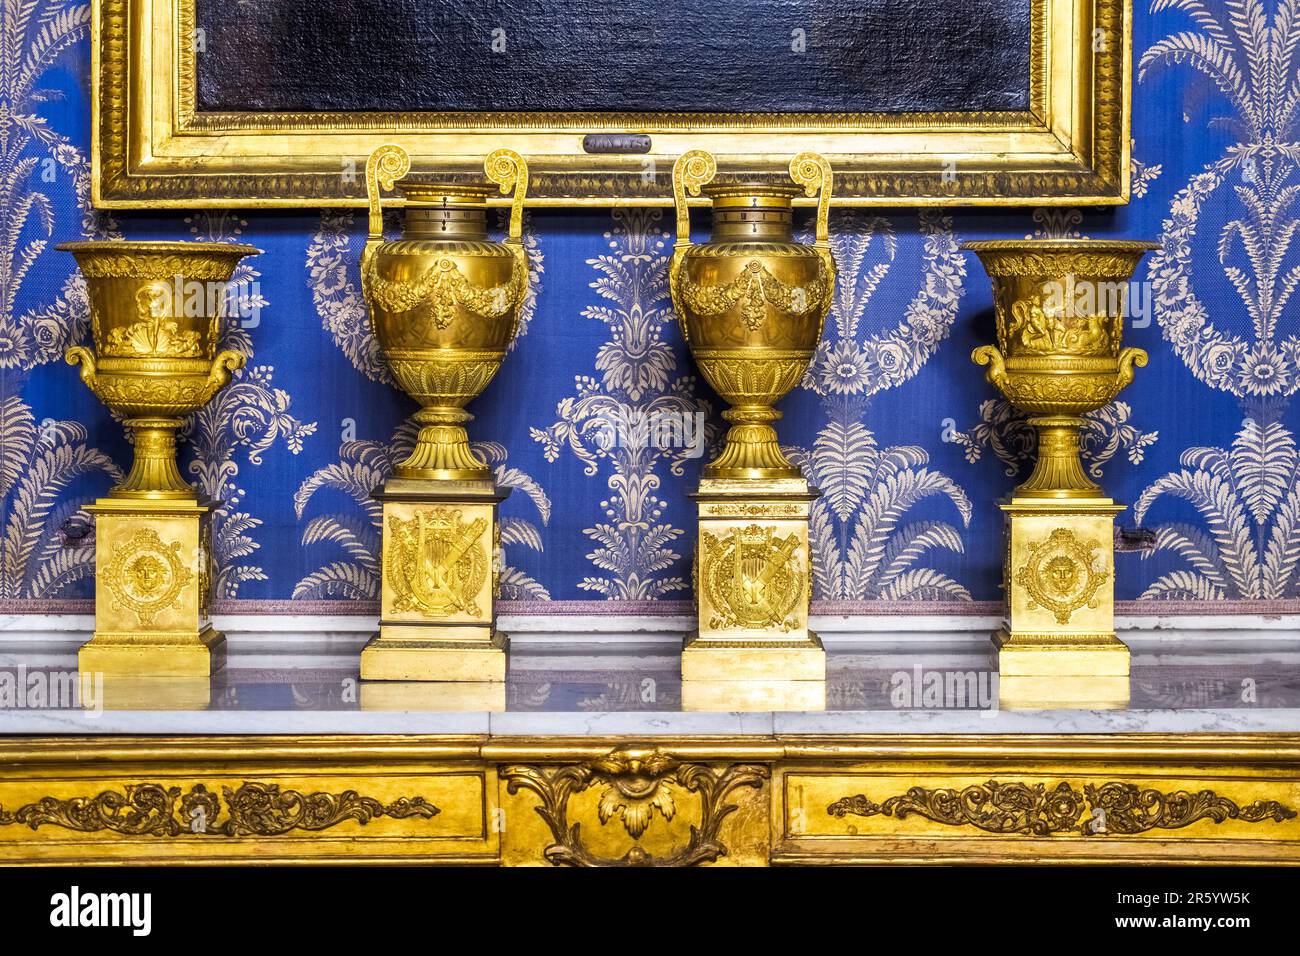 Bronze vases by the French artist P. Philippe Thomire (Paris, 1751-1842) in the second Antechamber of the Royal Palace of Naples that In 1734 became the royal residence of the Bourbons - Naples, Italy Stock Photo